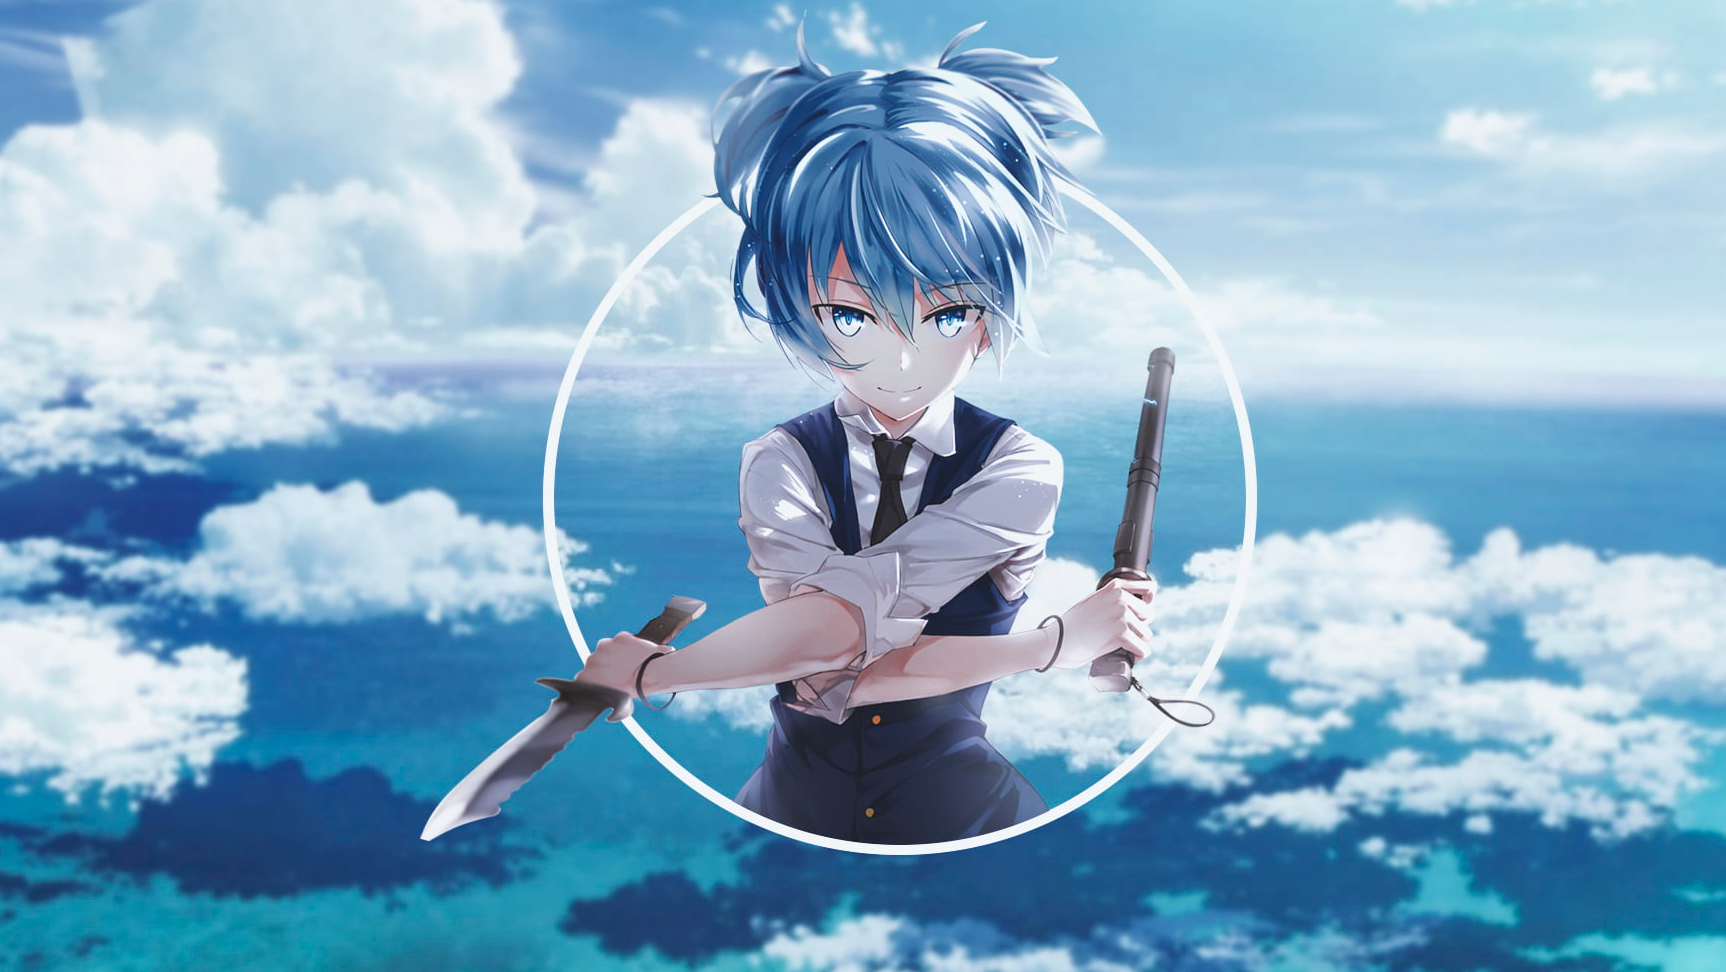 Anime Anime Girls Picture In Picture Assassination Classroom Shiota Nagisa Blue Hair 1726x972